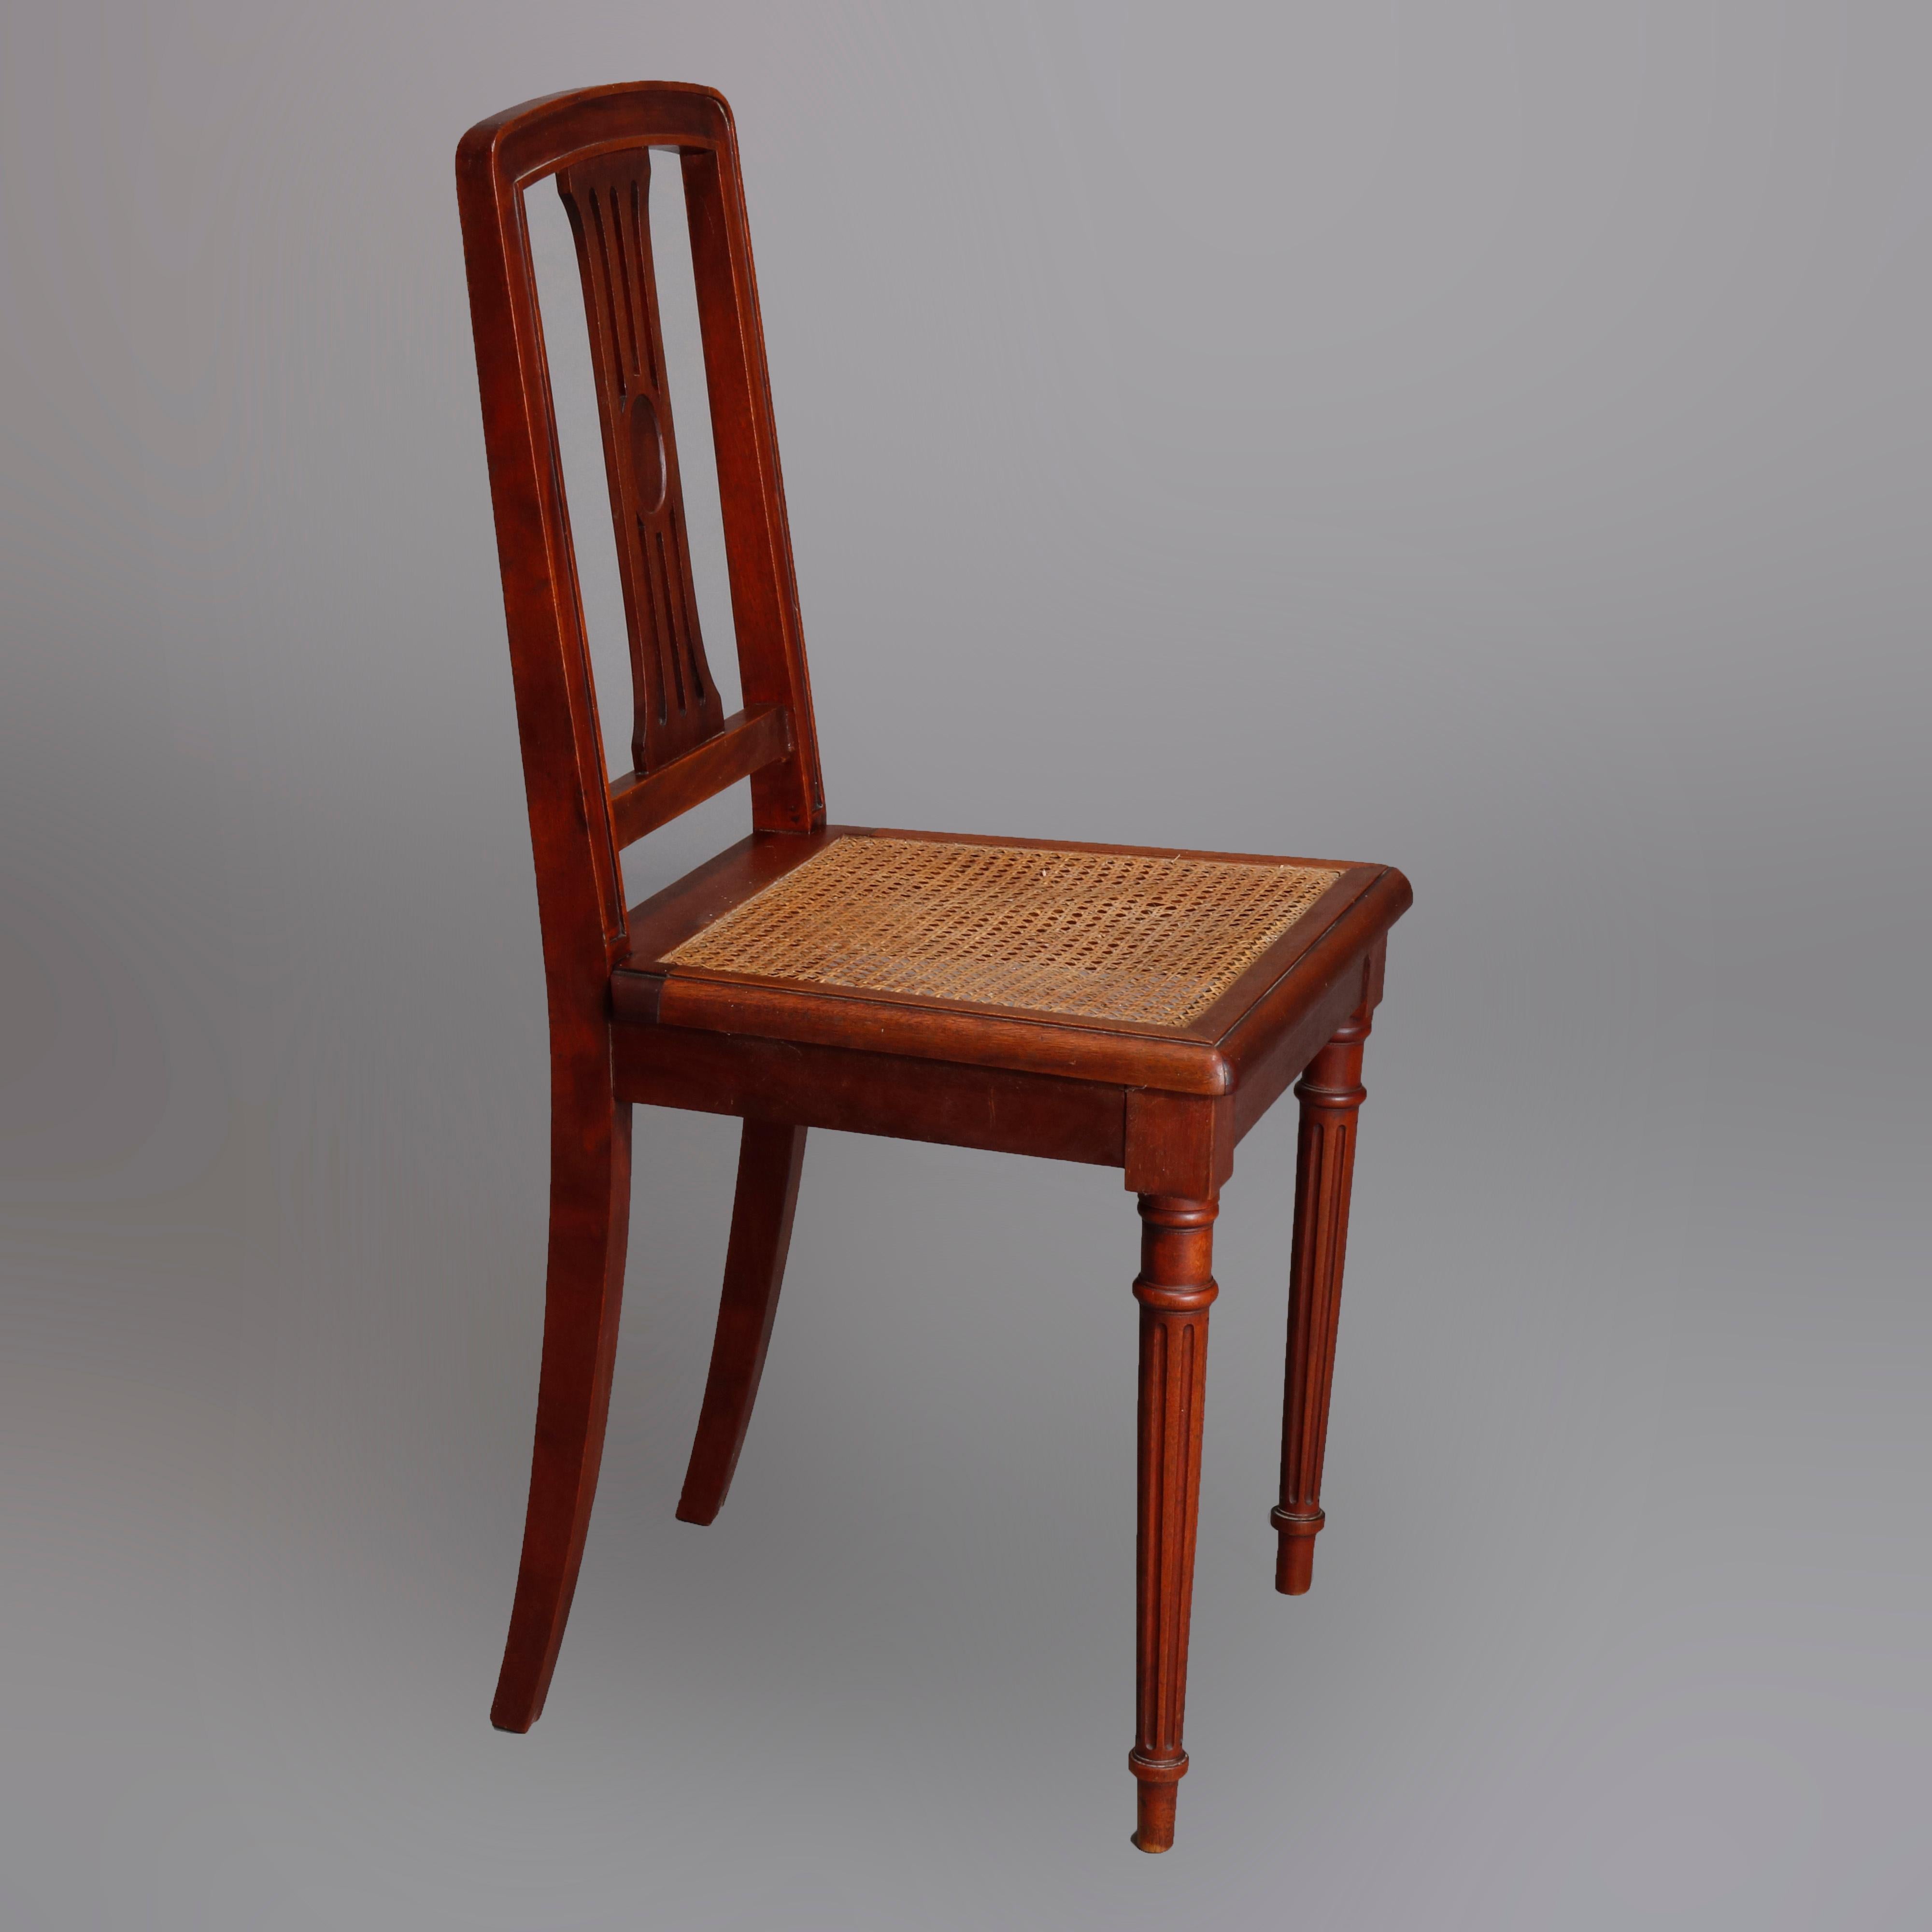 Six Antique French Louis XVI Mahogany Cane Seat Chairs, Early 20th Century For Sale 1